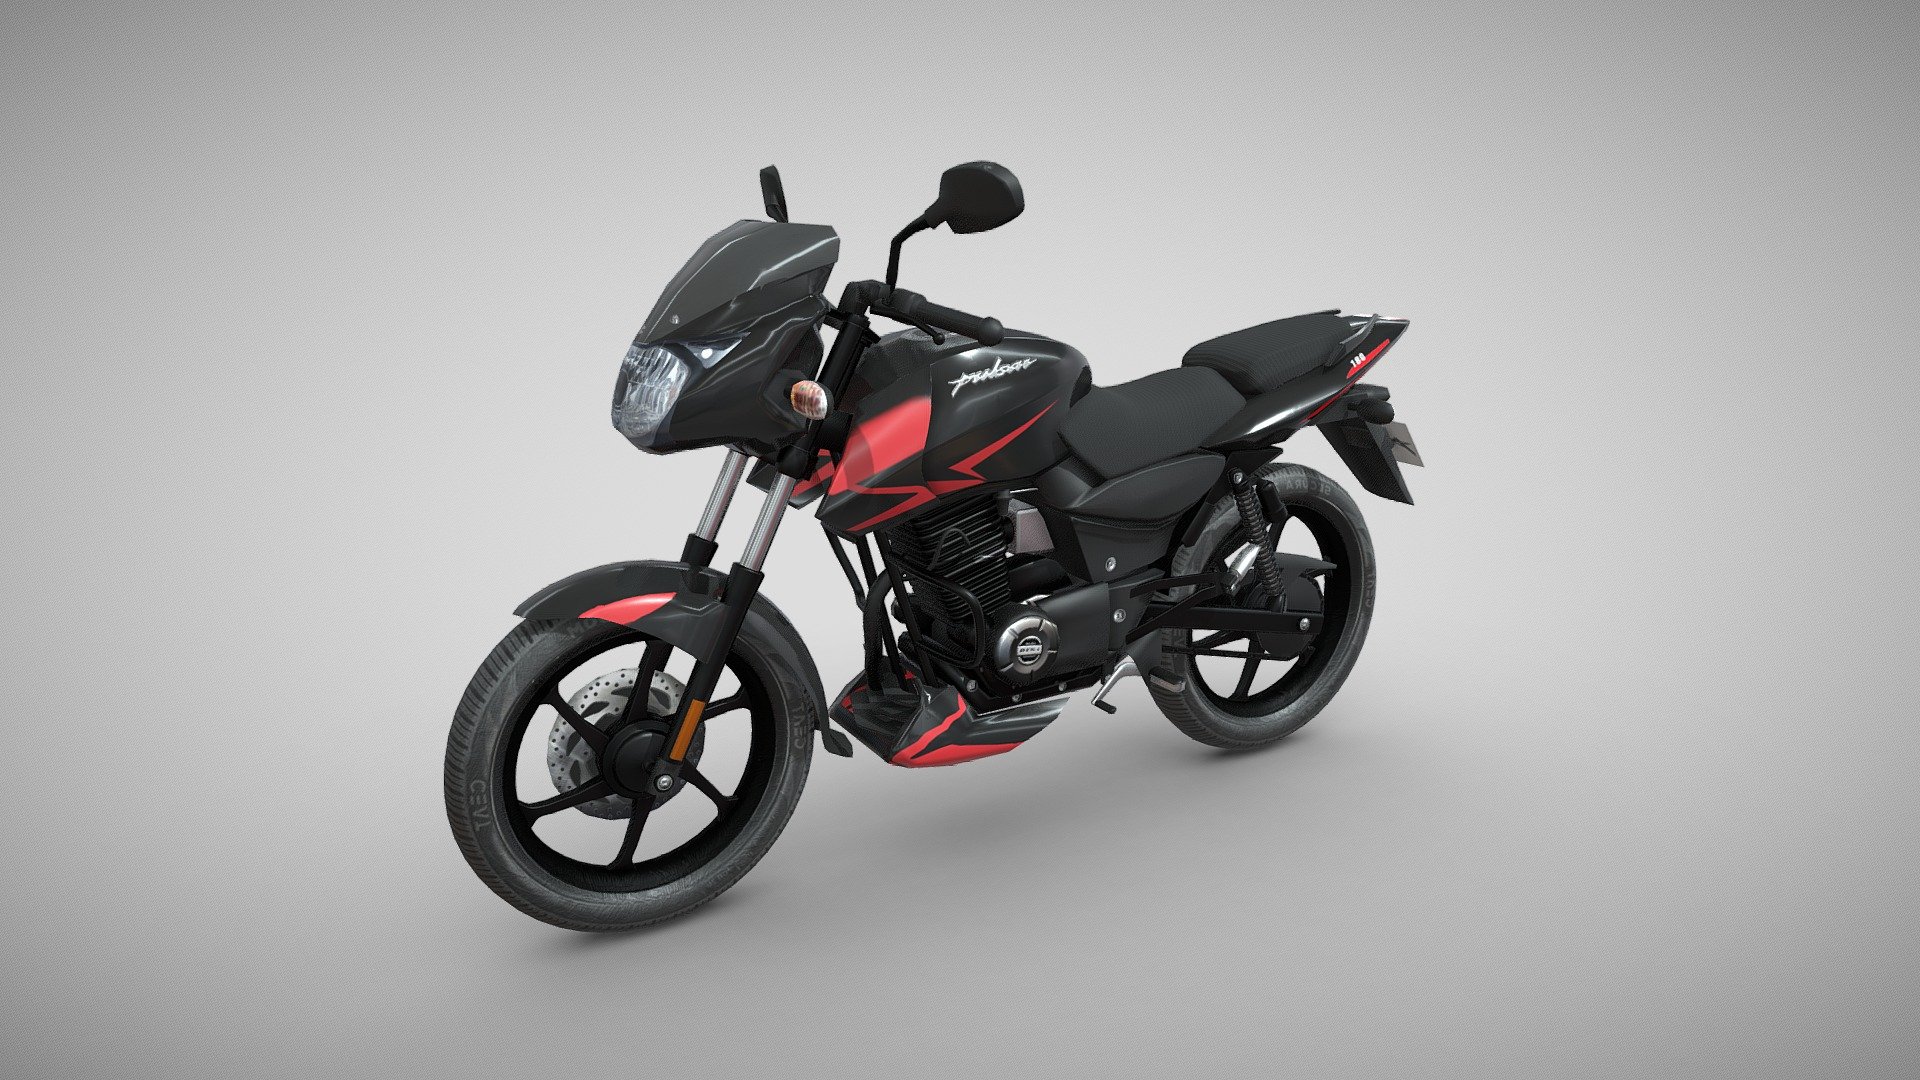 I am super happy to show you my latest mobile game ready low poly Bike Bajaj Pulsar 150 model that I made.
Model Type: Polygonal
Polygons: 24,526
Vertices: 24,807
Formats available: Maya ASCII 2018, Maya Binary 2018, FBX , OBJ
Textures: Color, Normal, Metallic and Roughness maps
Texture Resolution: 4096 x 4096 pixels

The model is fully optimized for use in real-time applications, making it suitable for use in virtual reality, augmented reality, mobile games, PC games and other interactive experiences.

Hope you like it! - Bajaj Pulsar 150 - Buy Royalty Free 3D model by Bhavik_Suthar 3d model